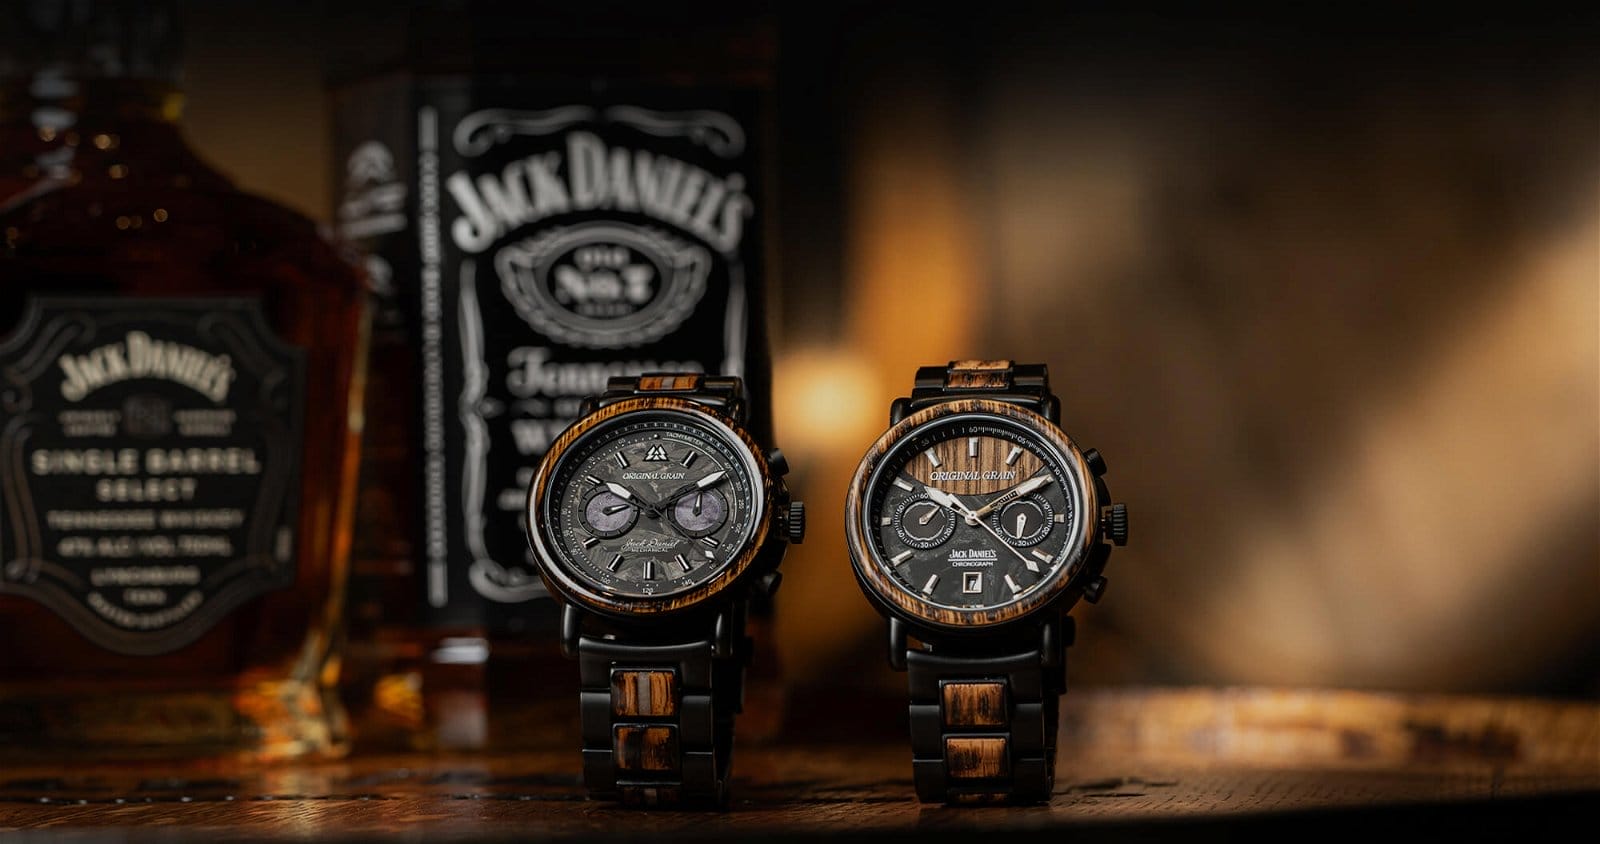 ABout our collaboration with Jack Daniel's